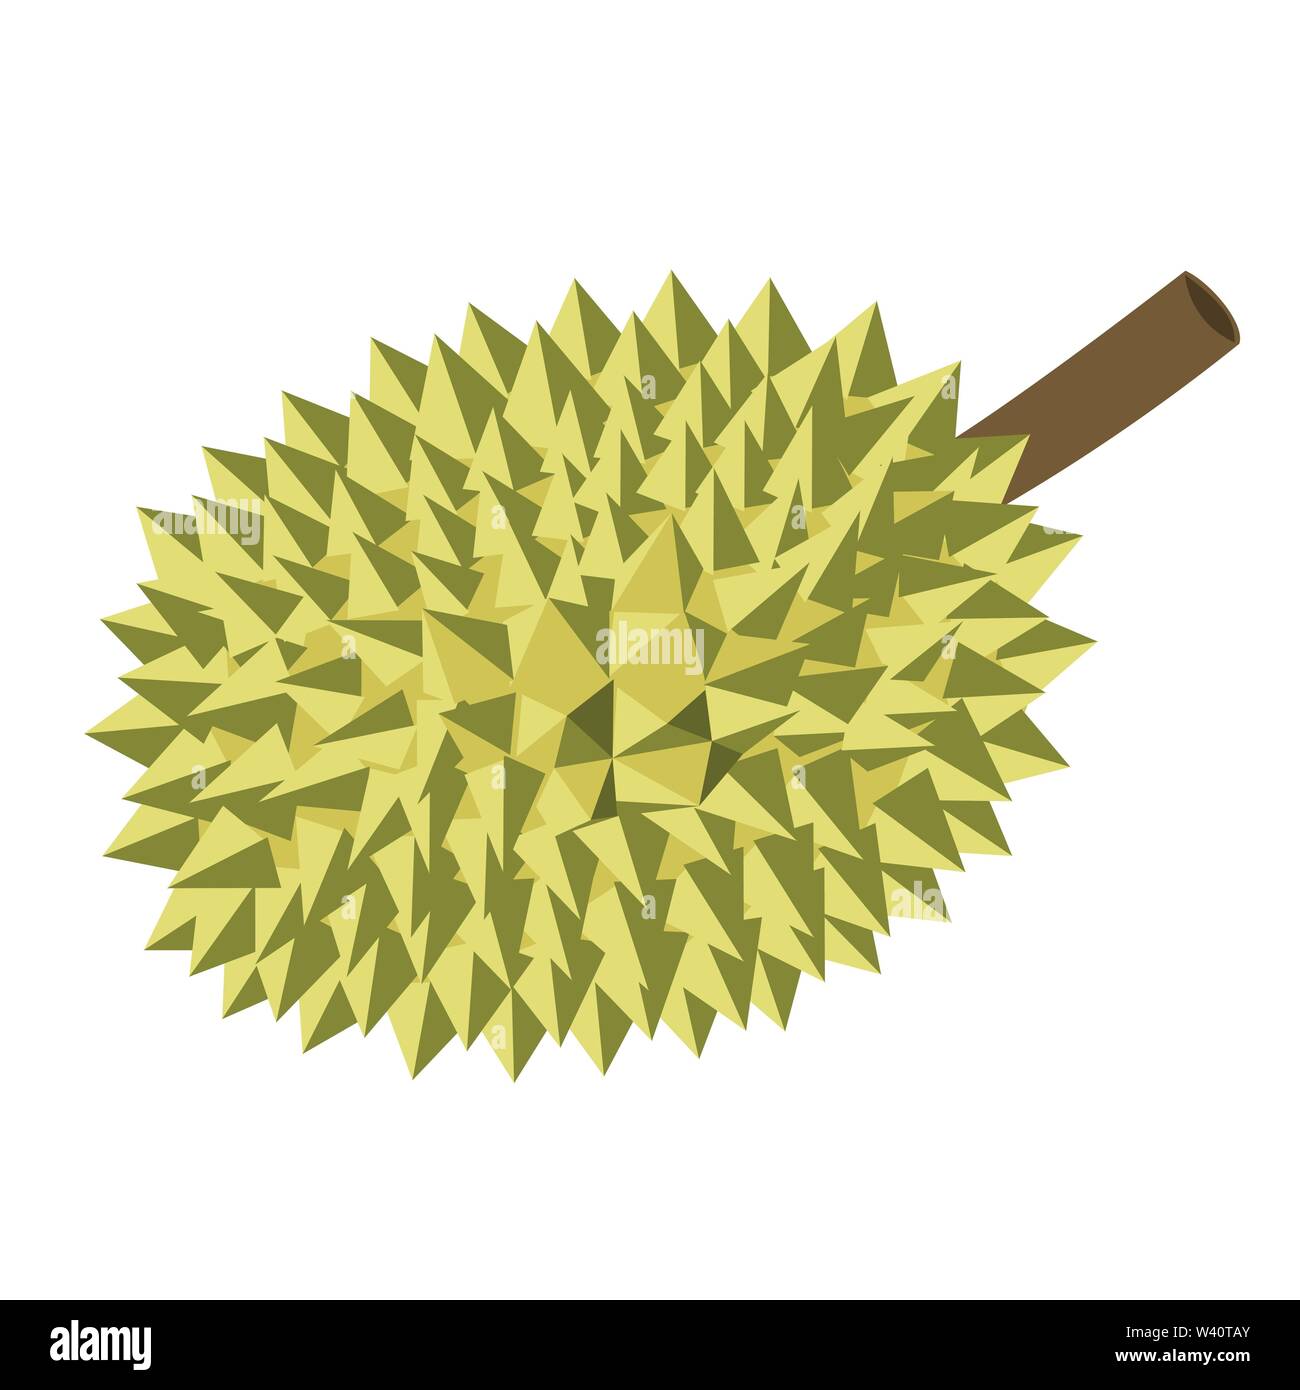 vector illustrations of durian fruit icons. Stock Vector